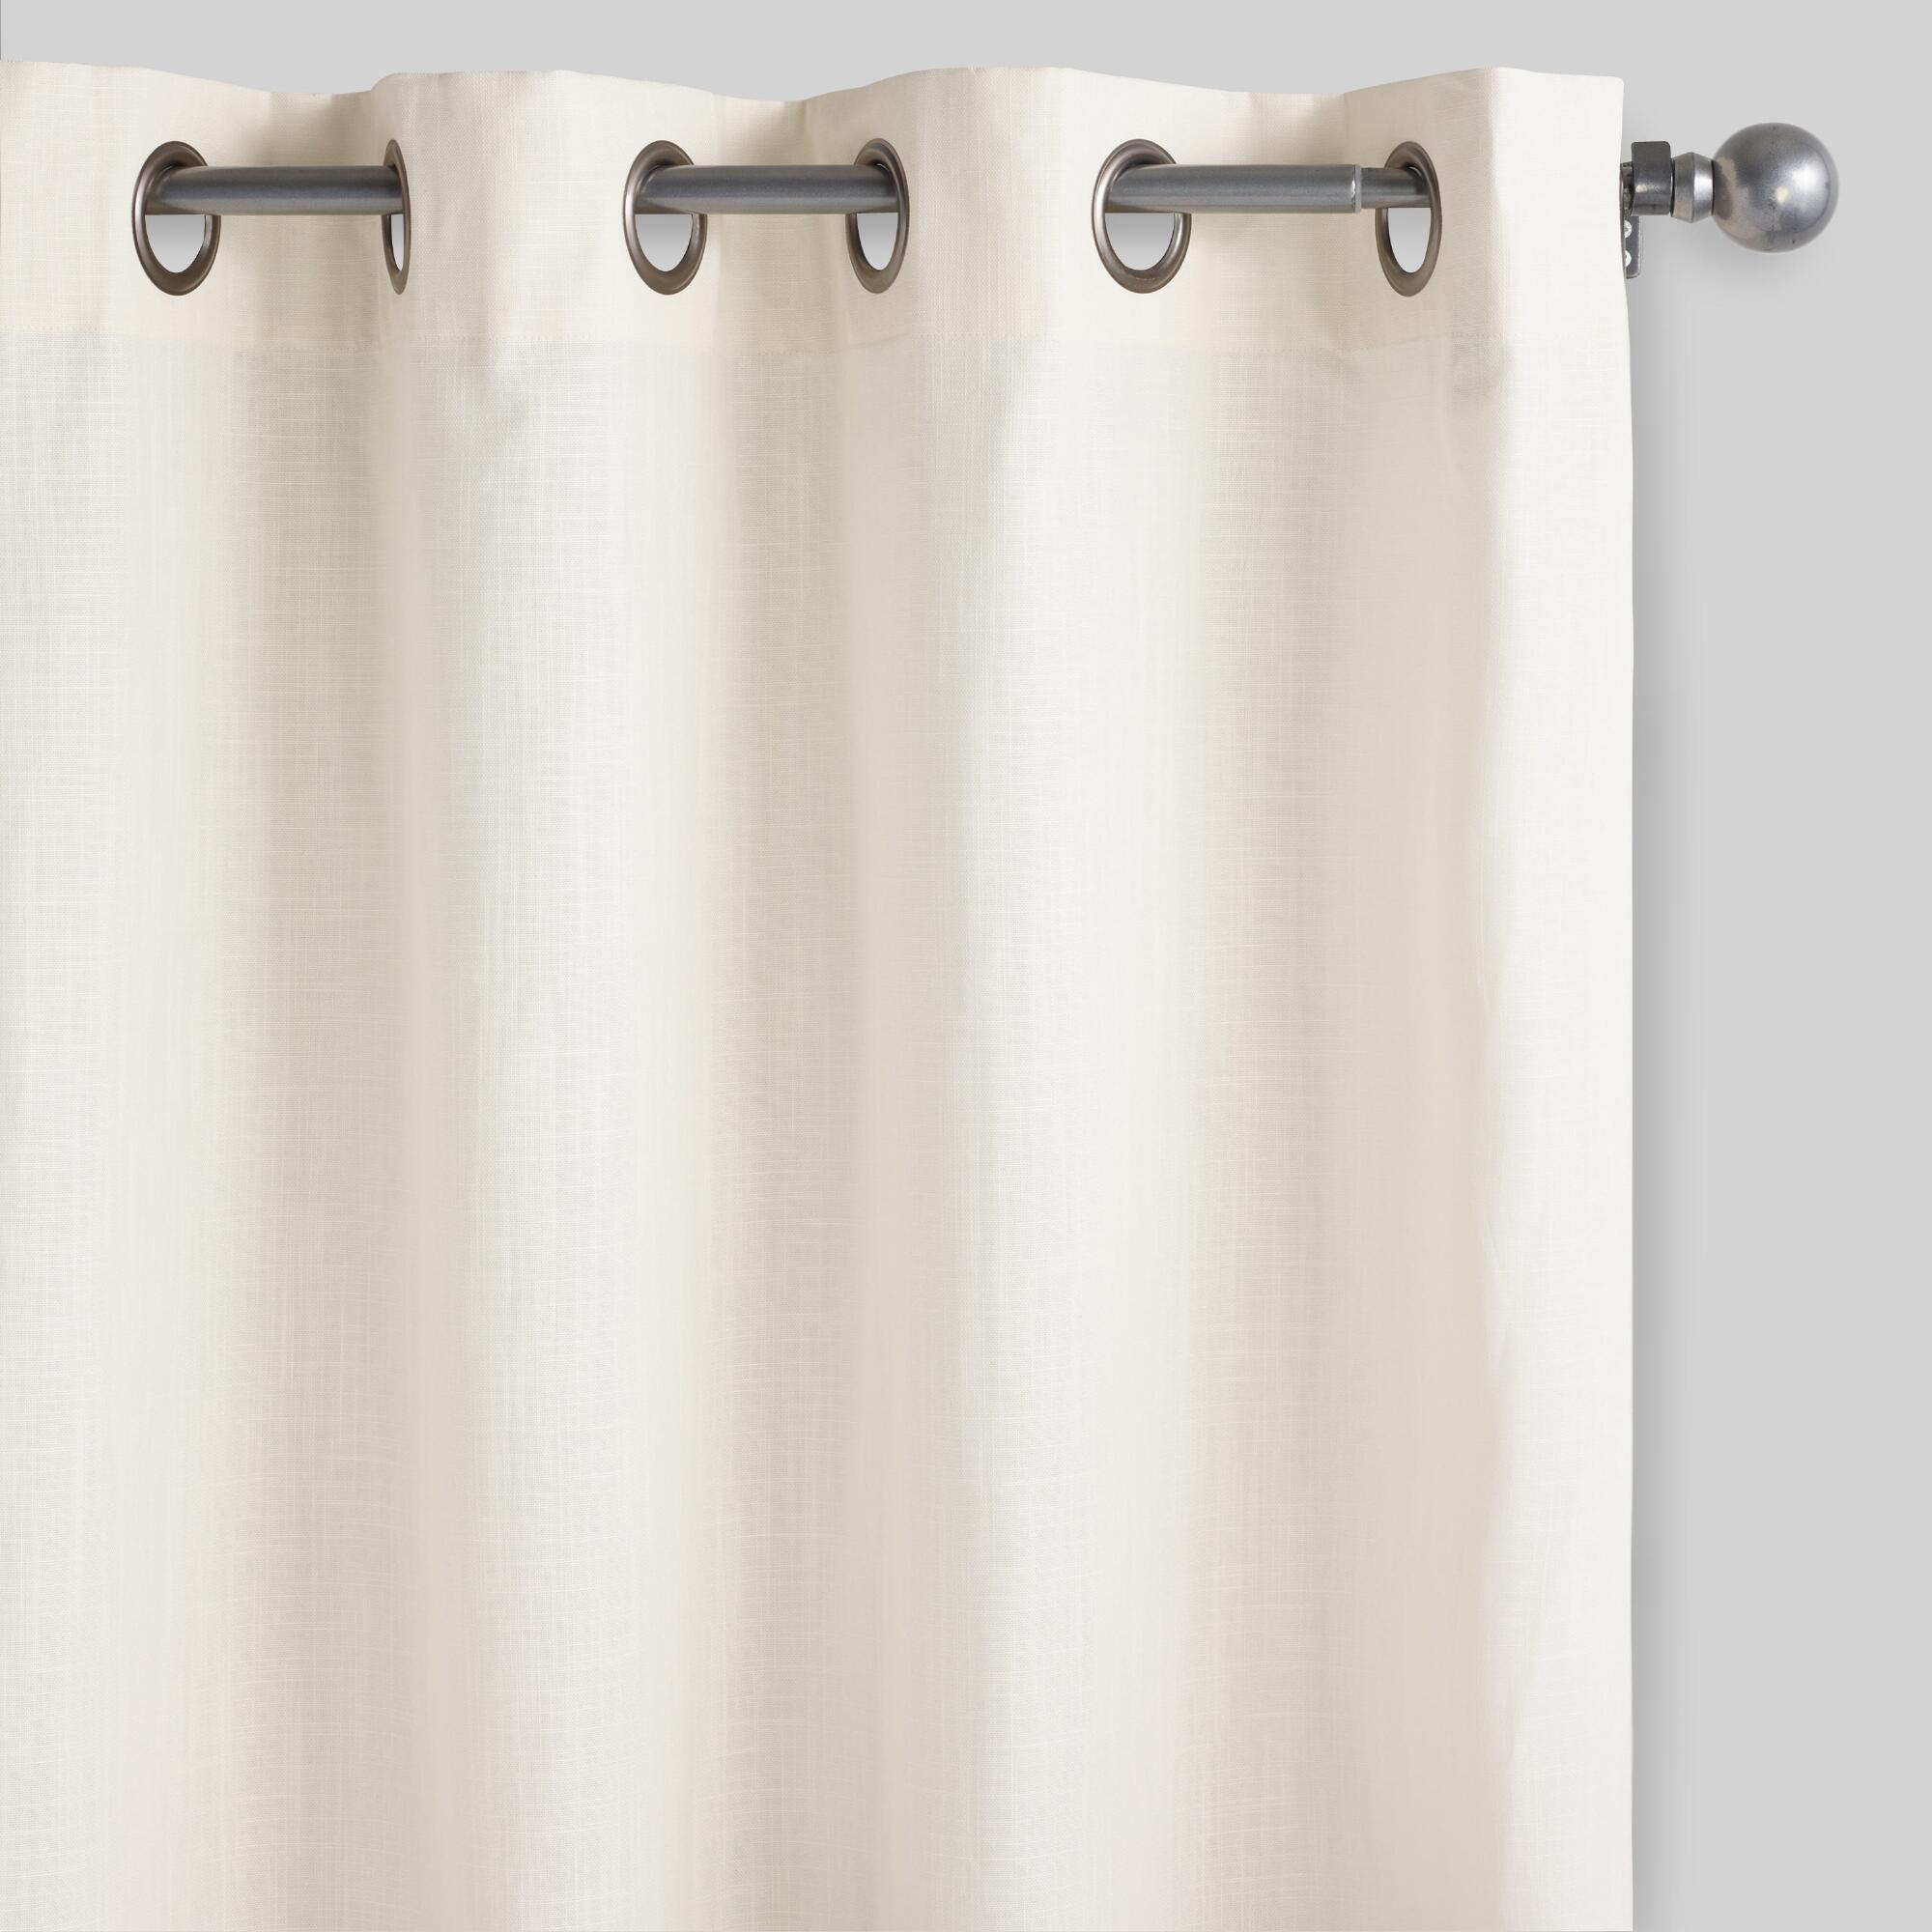 Ivory Cotton Harlow Grommet Top Curtains Set Of 2: White by World Market